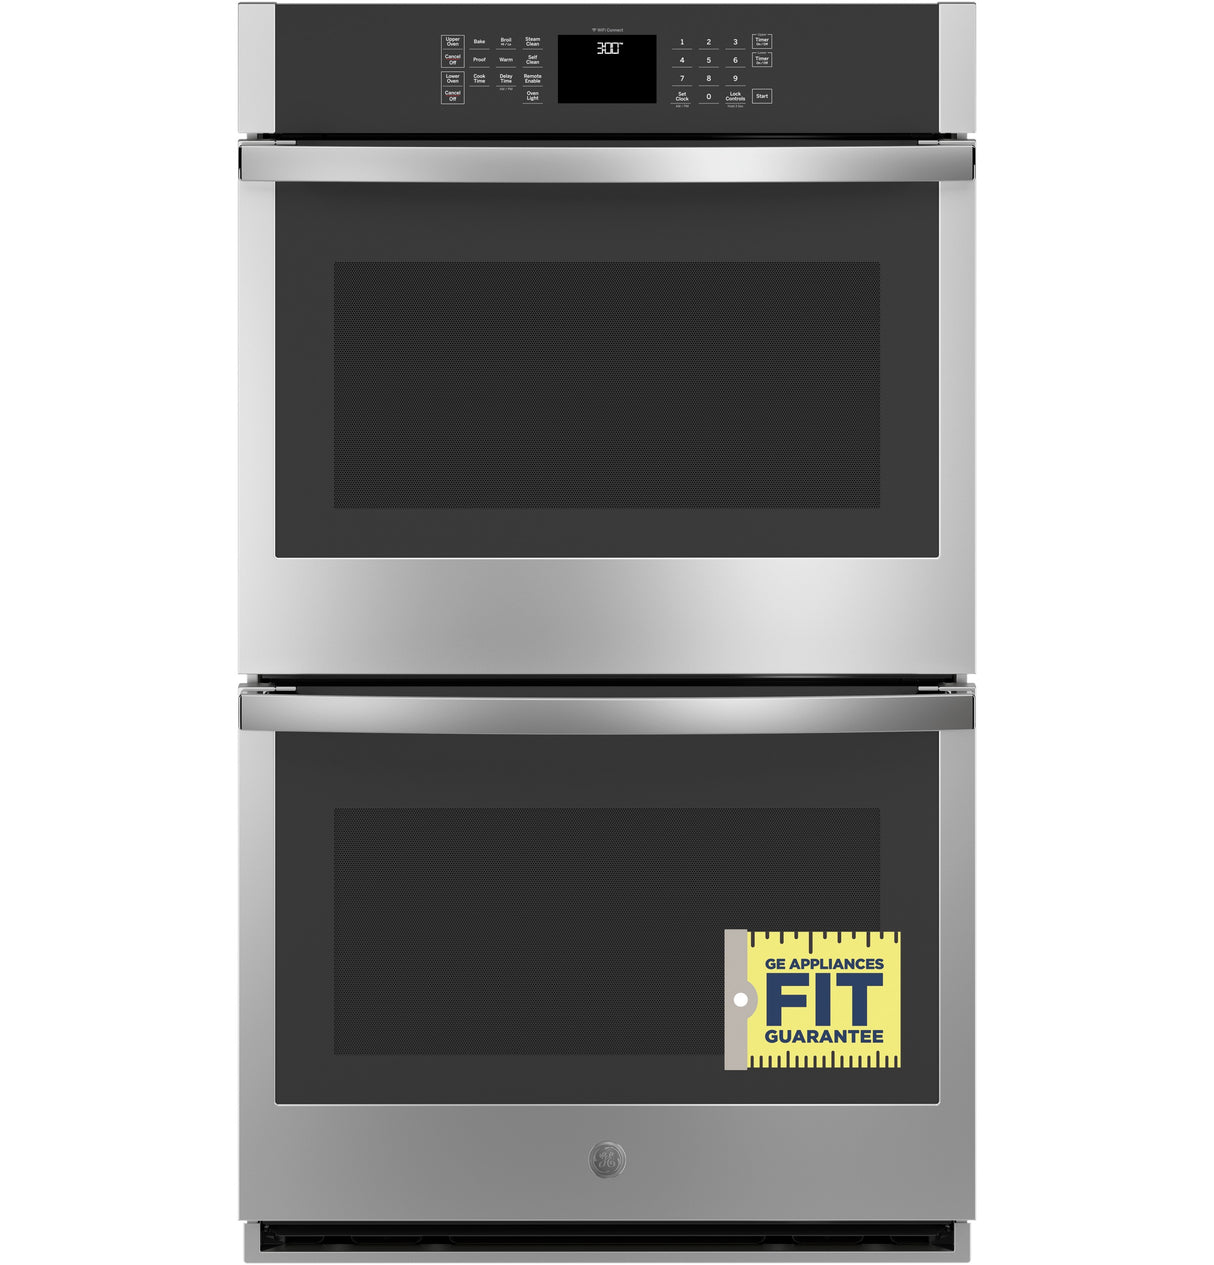 GE(R) 30" Smart Built-In Self-Clean Double Wall Oven with Never-Scrub Racks - (JTD3000SNSS)